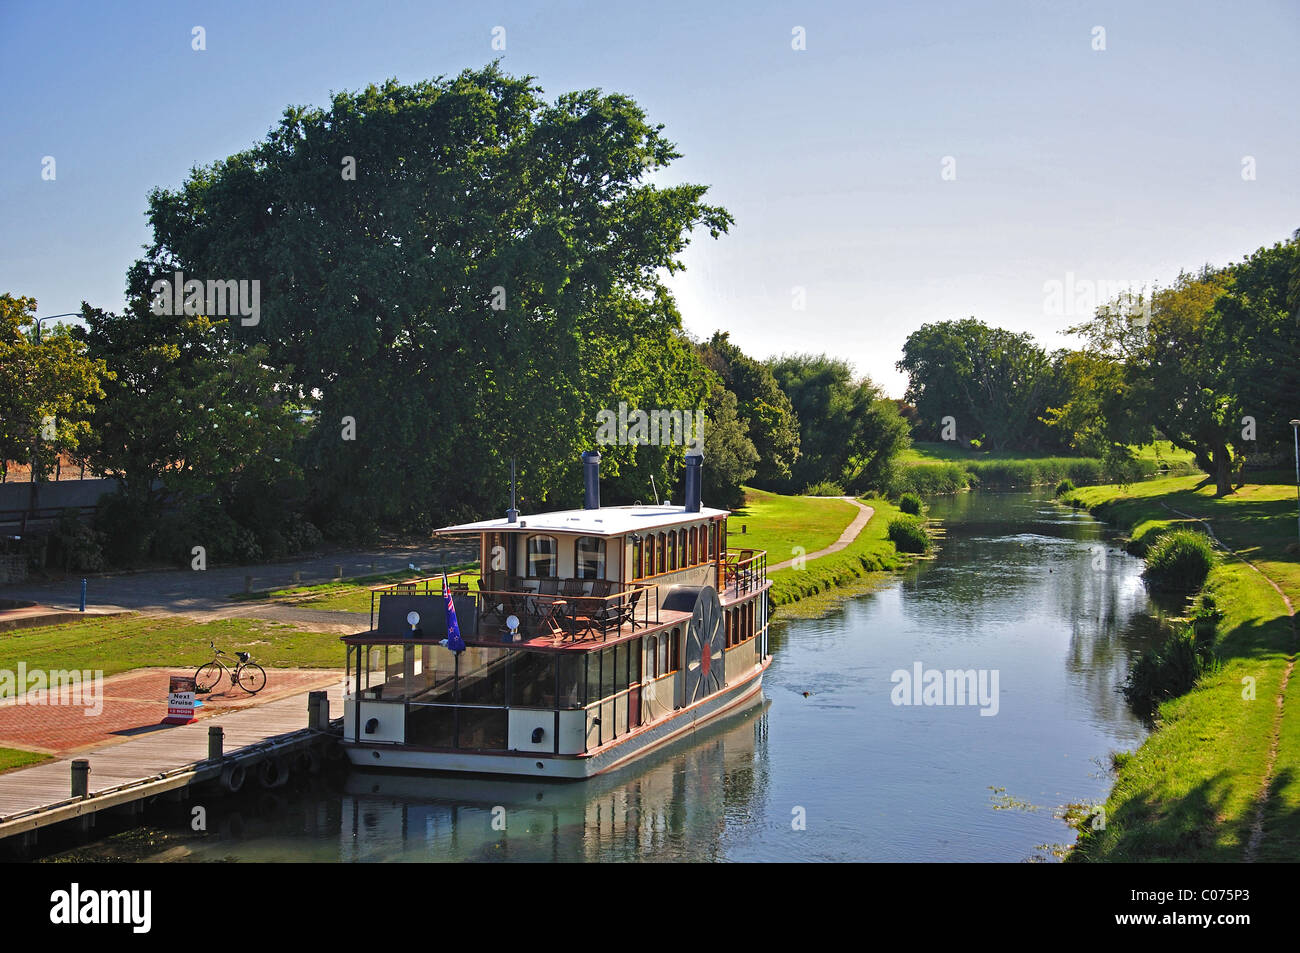 Riverboat on The Taylor River, Blenheim, Marlborough, South Island, New Zealand Stock Photo